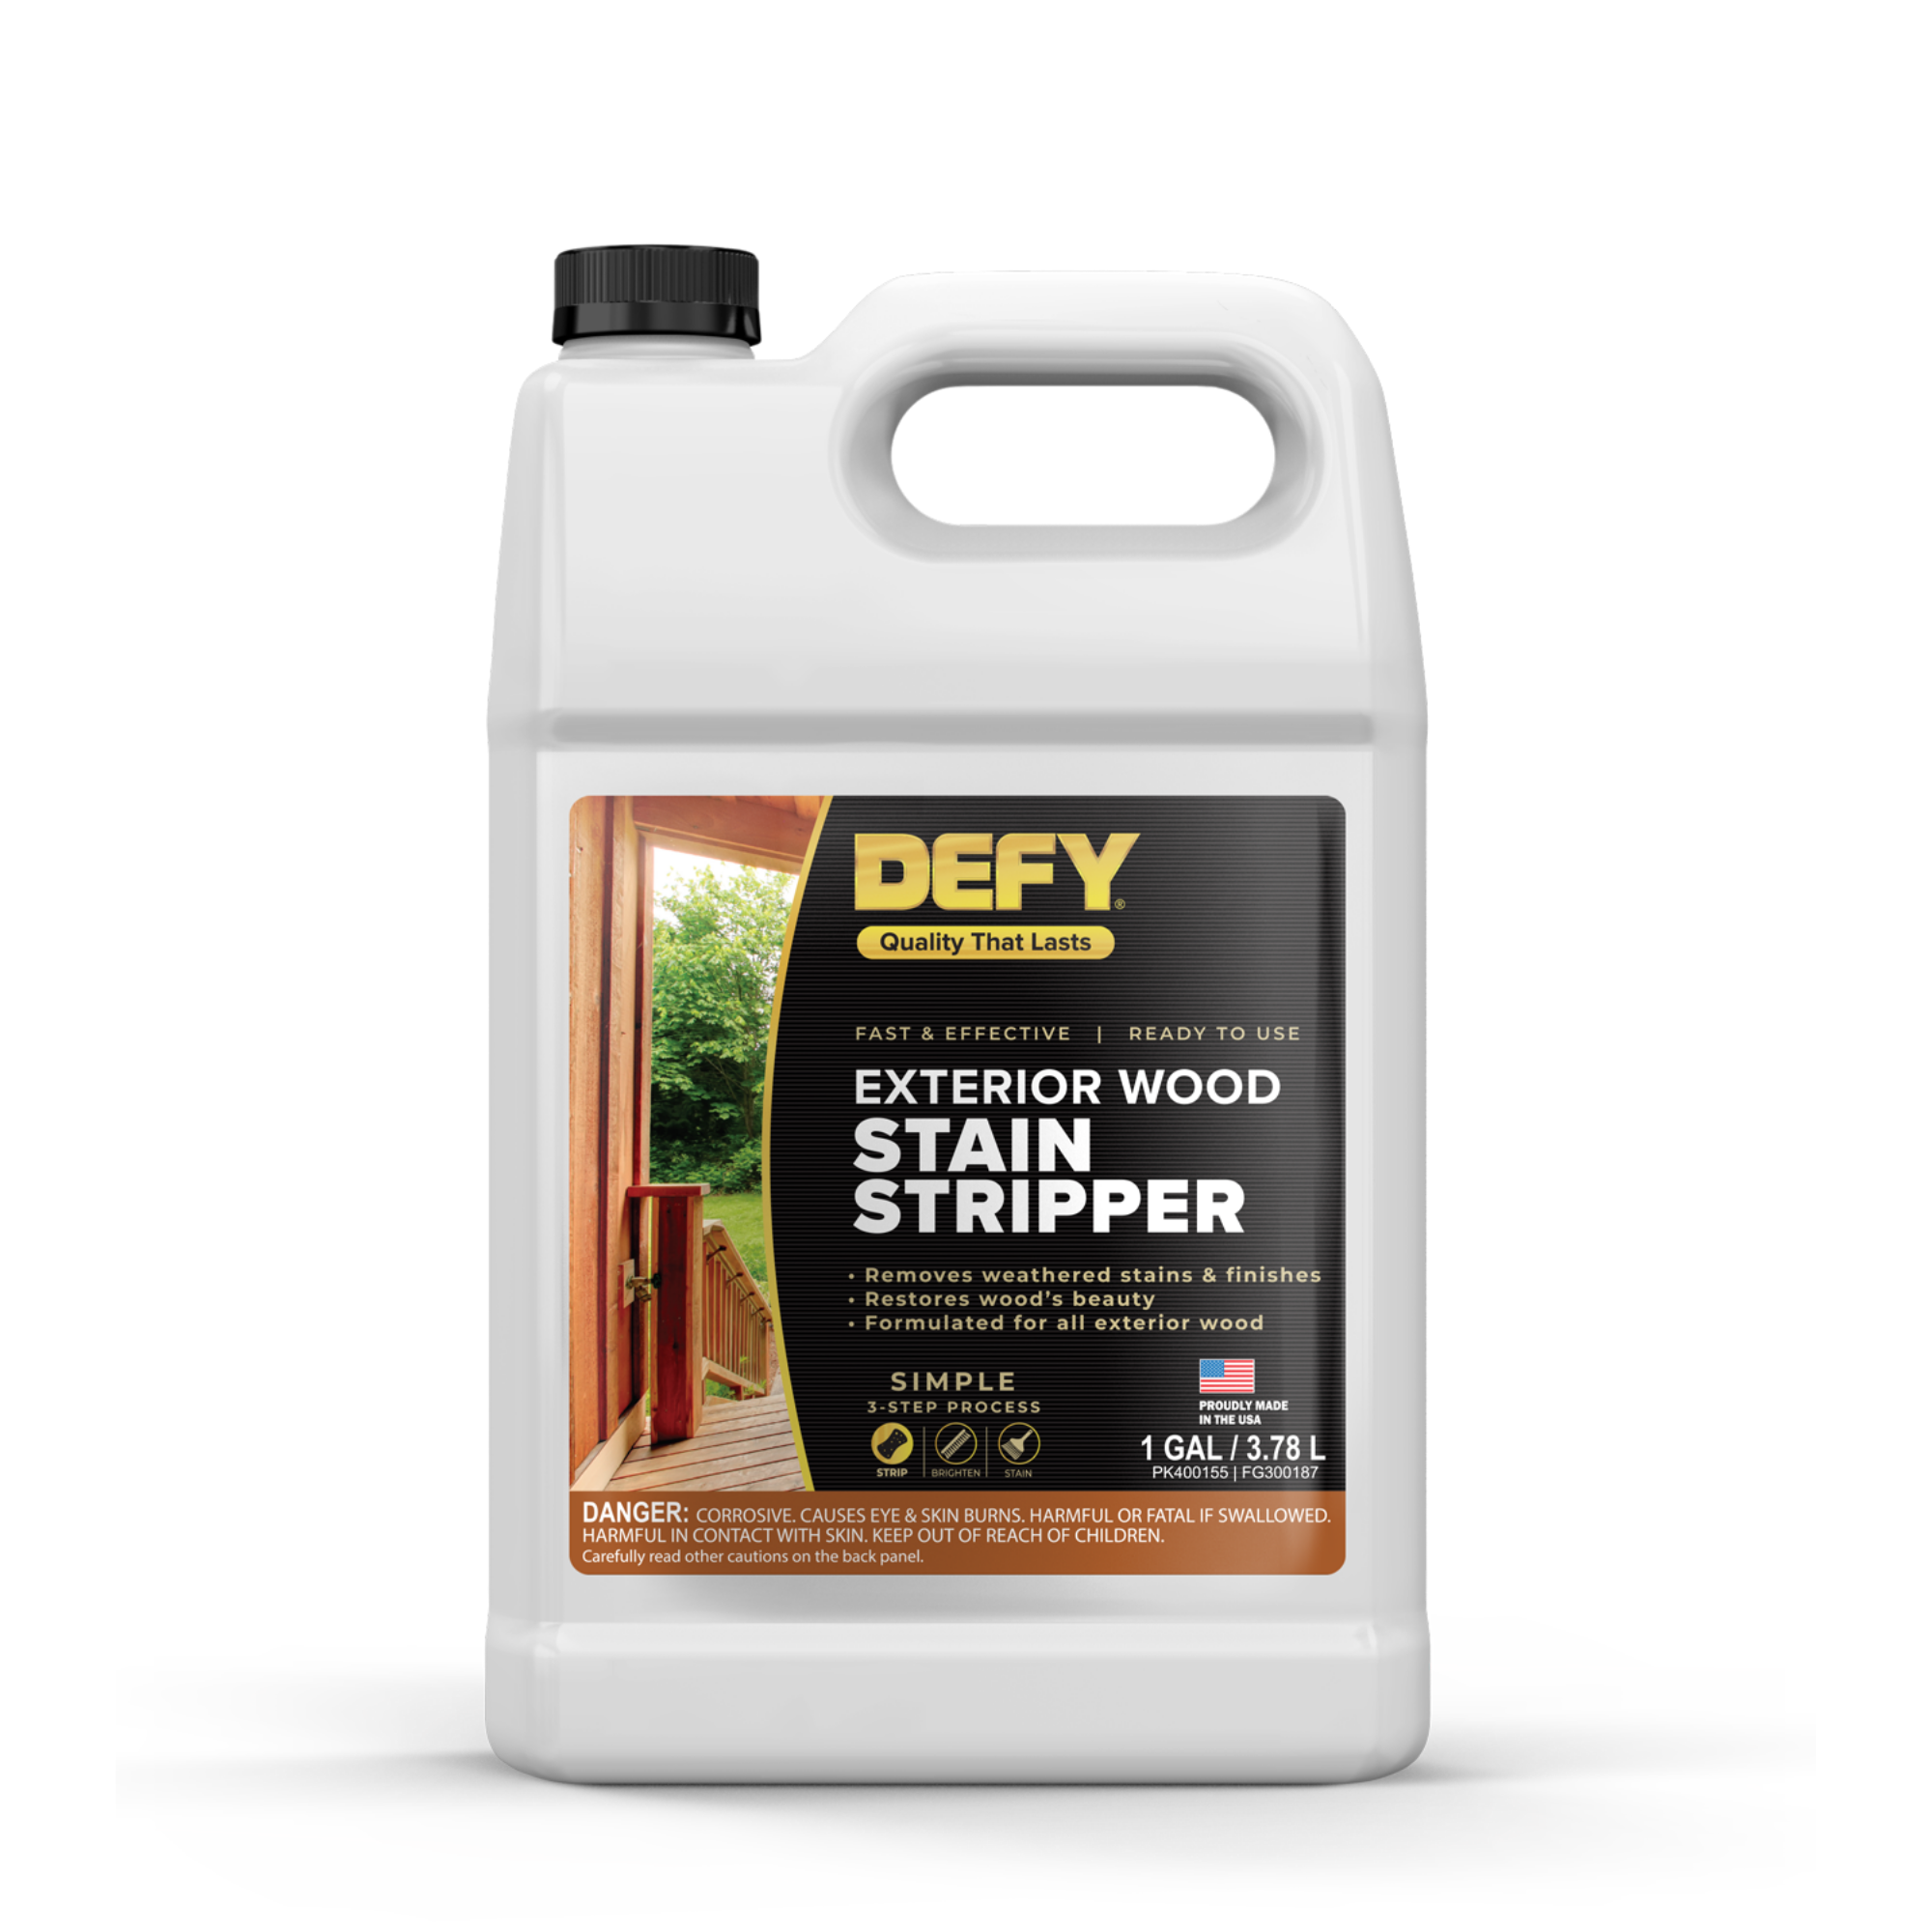 Lift Off Automotive Paint Stripper and Remover 1 Gallon